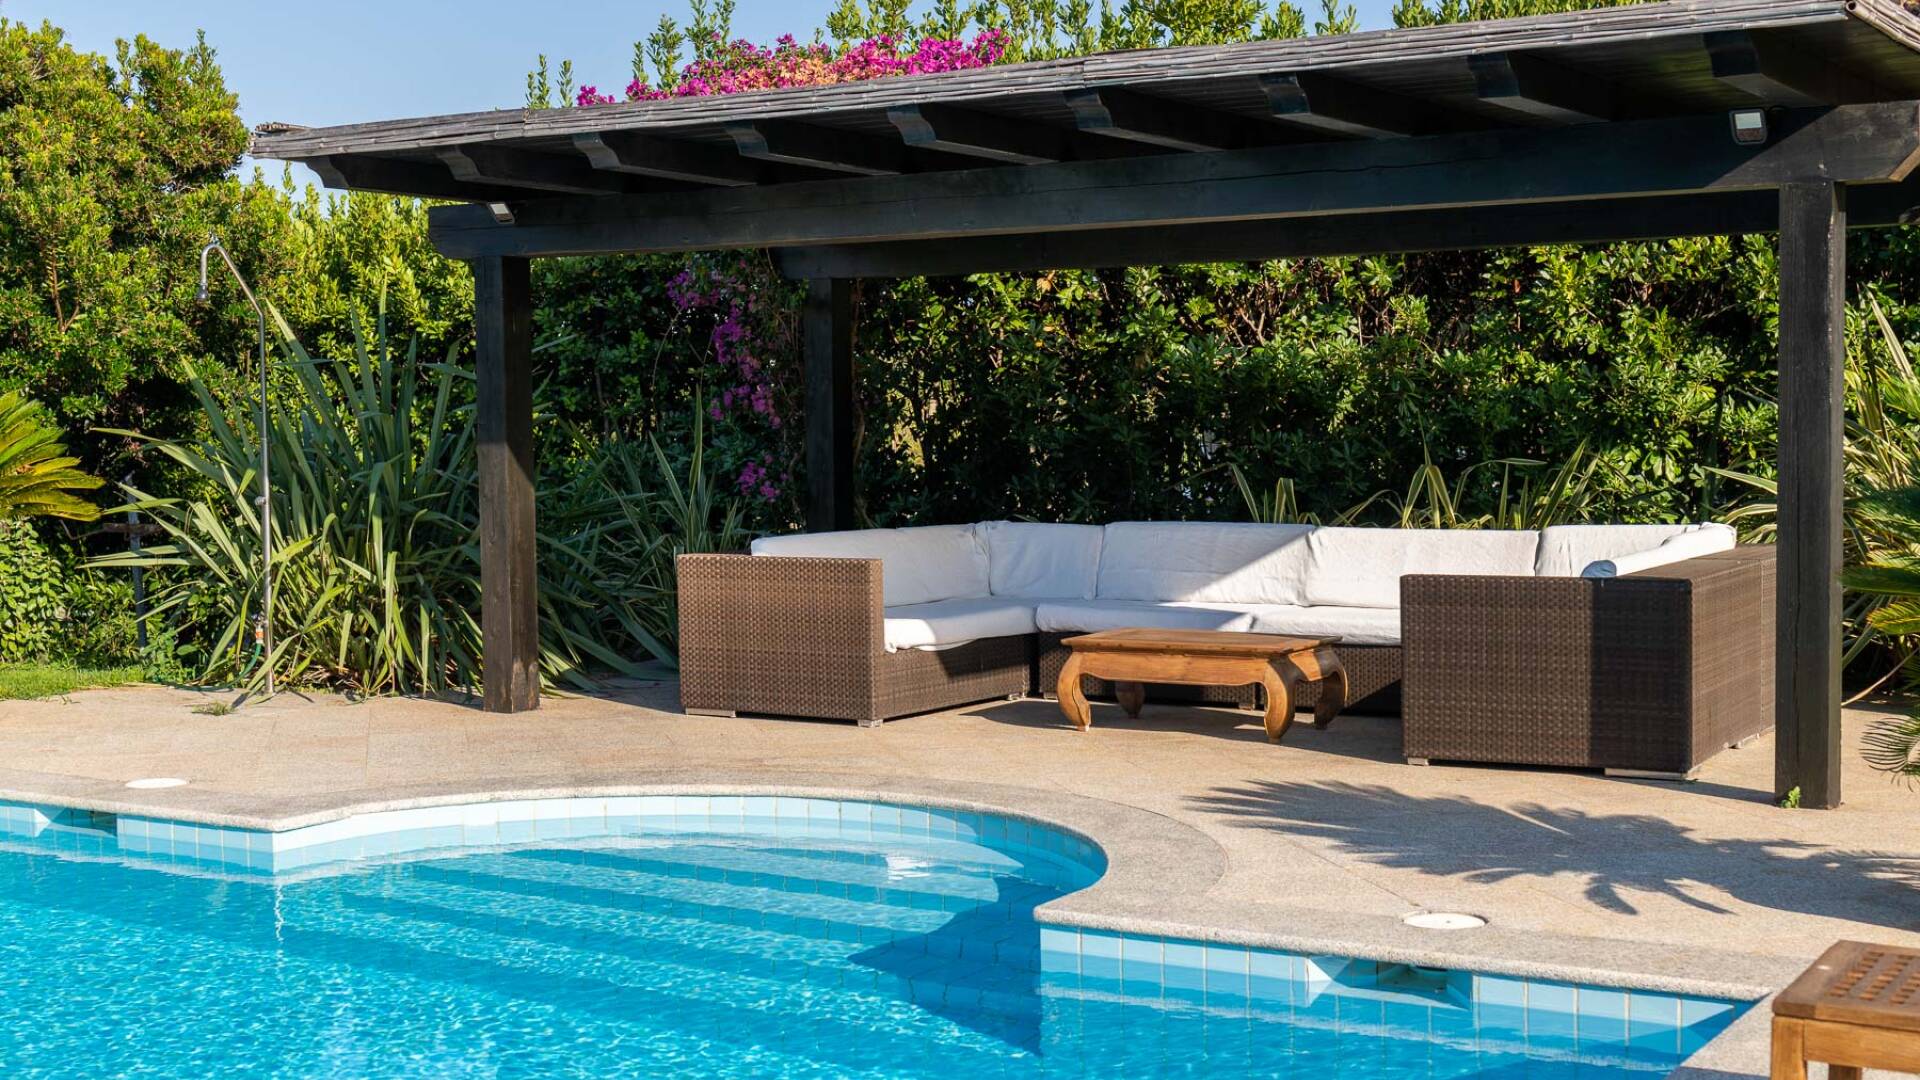 covered sitting area by the pool